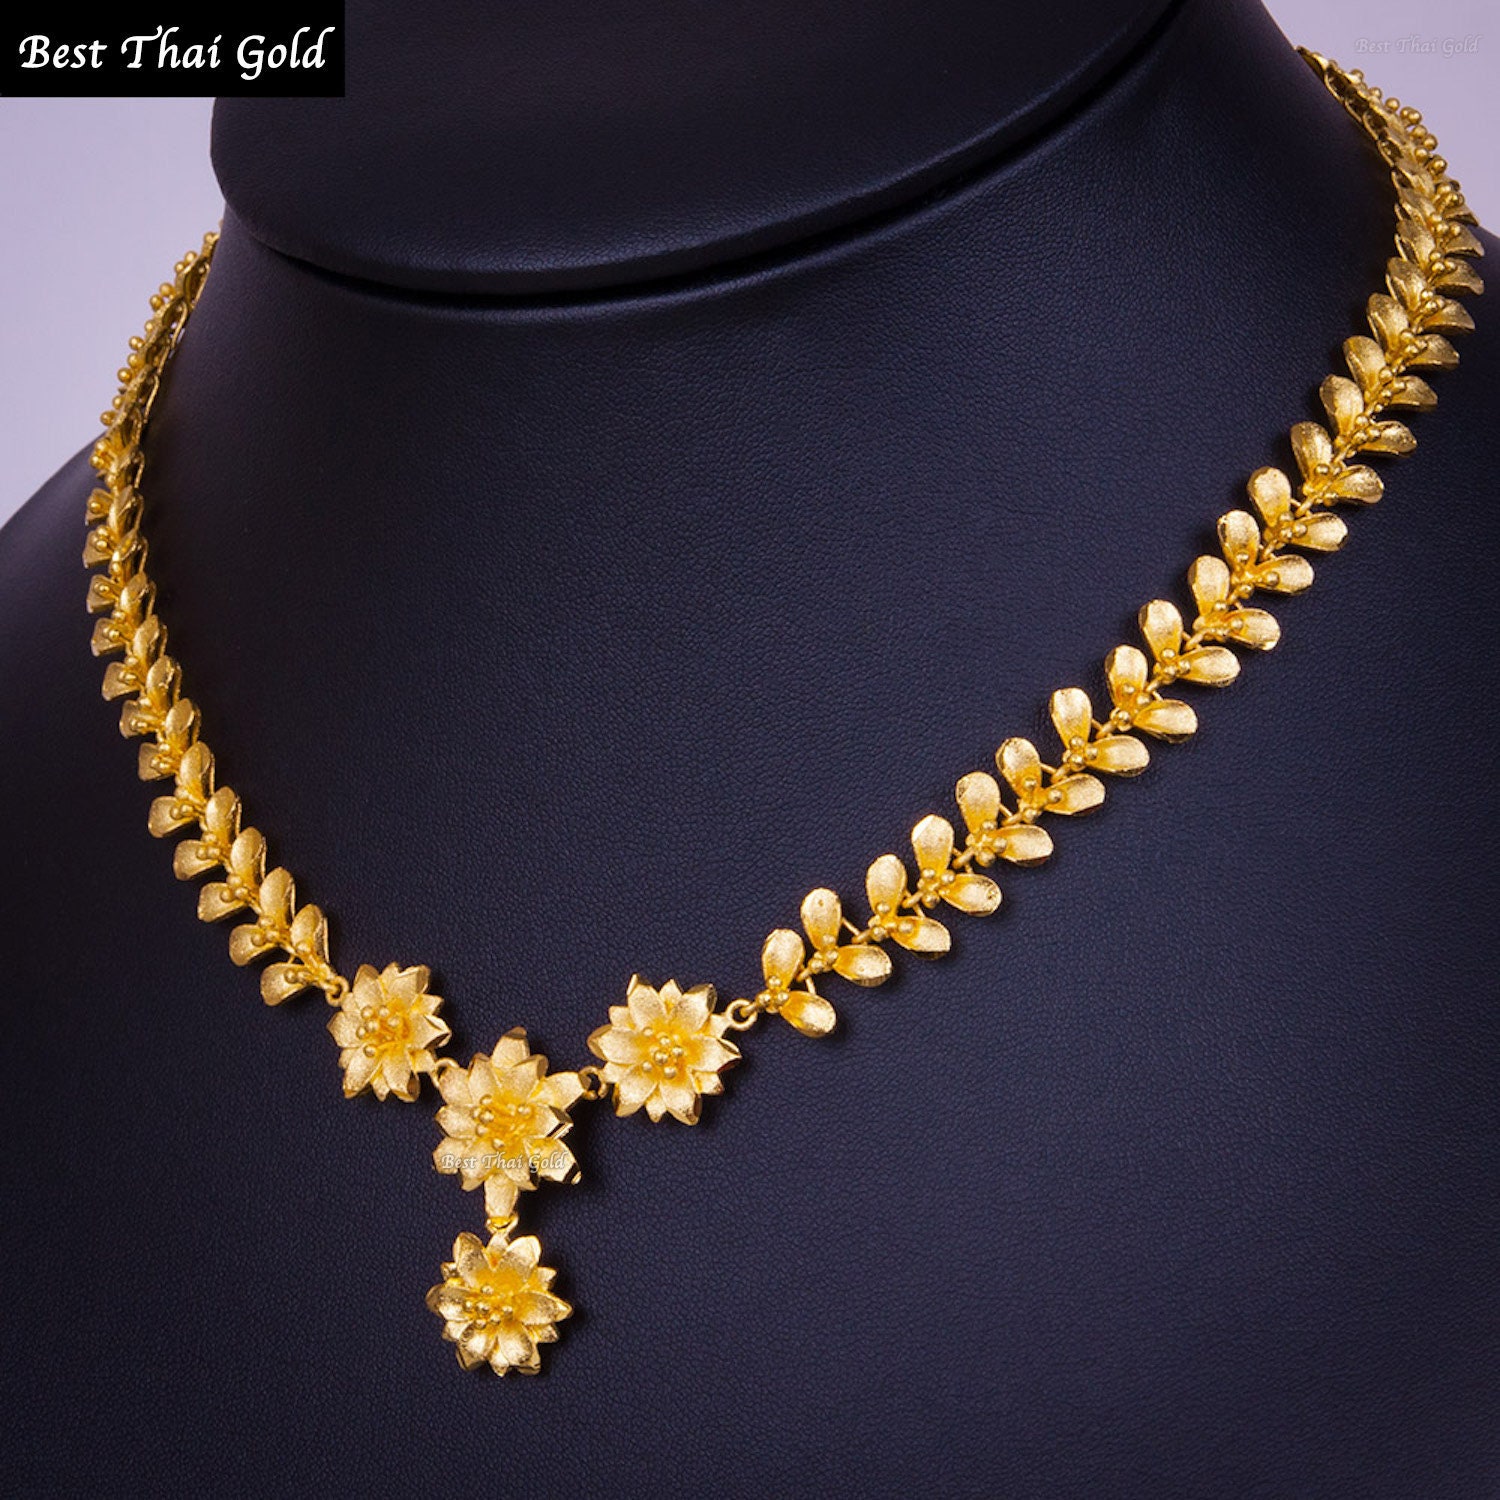 Flower Choker Necklaces for Womenwedding Gold - Etsy